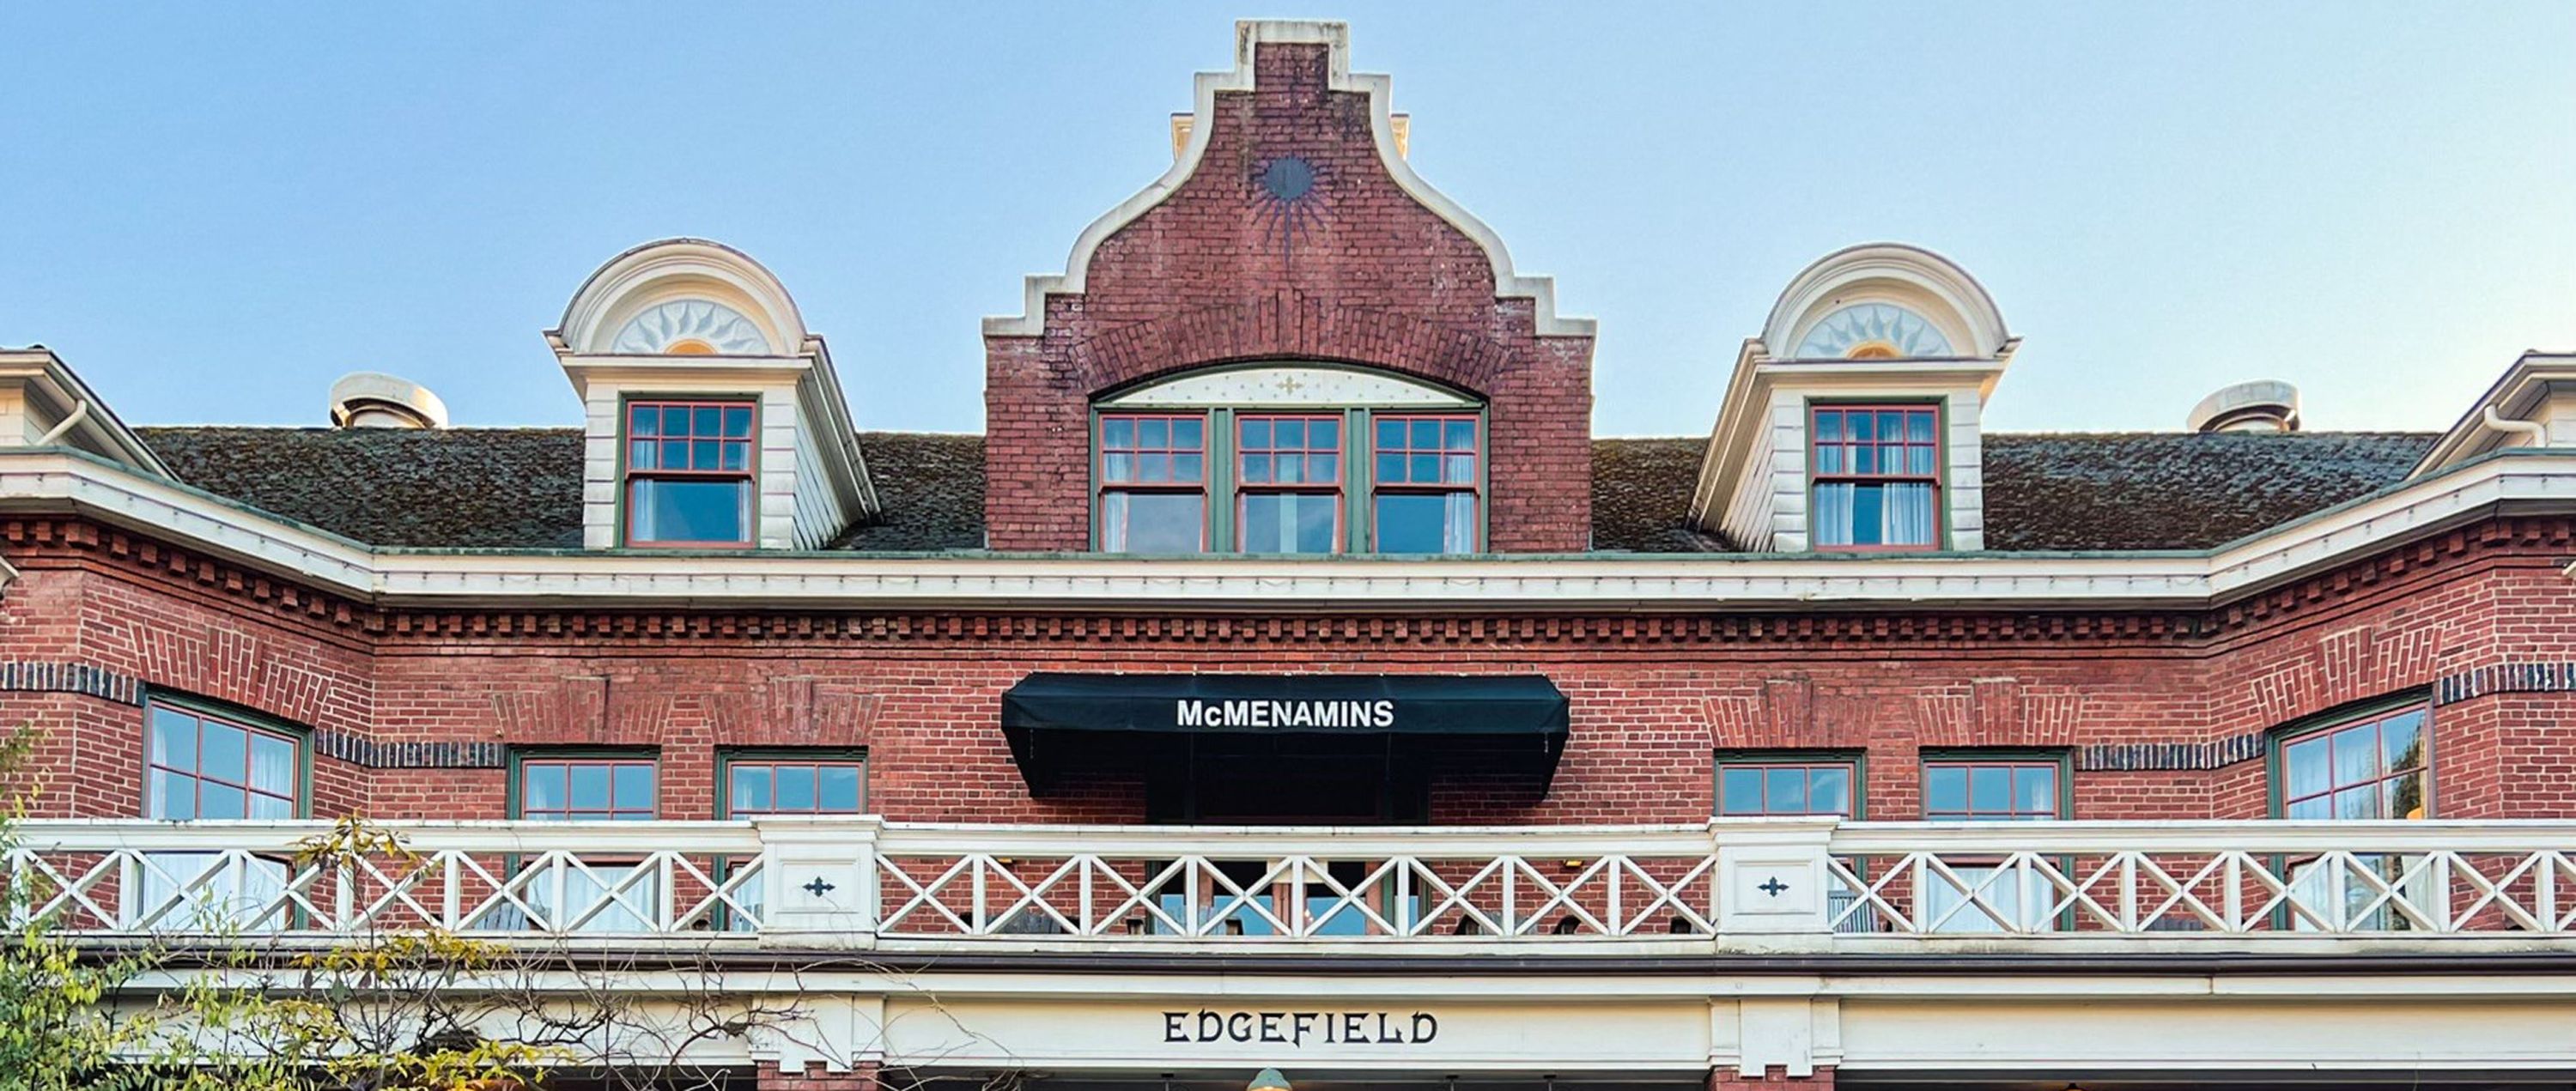 McMenamins Edgefield front view